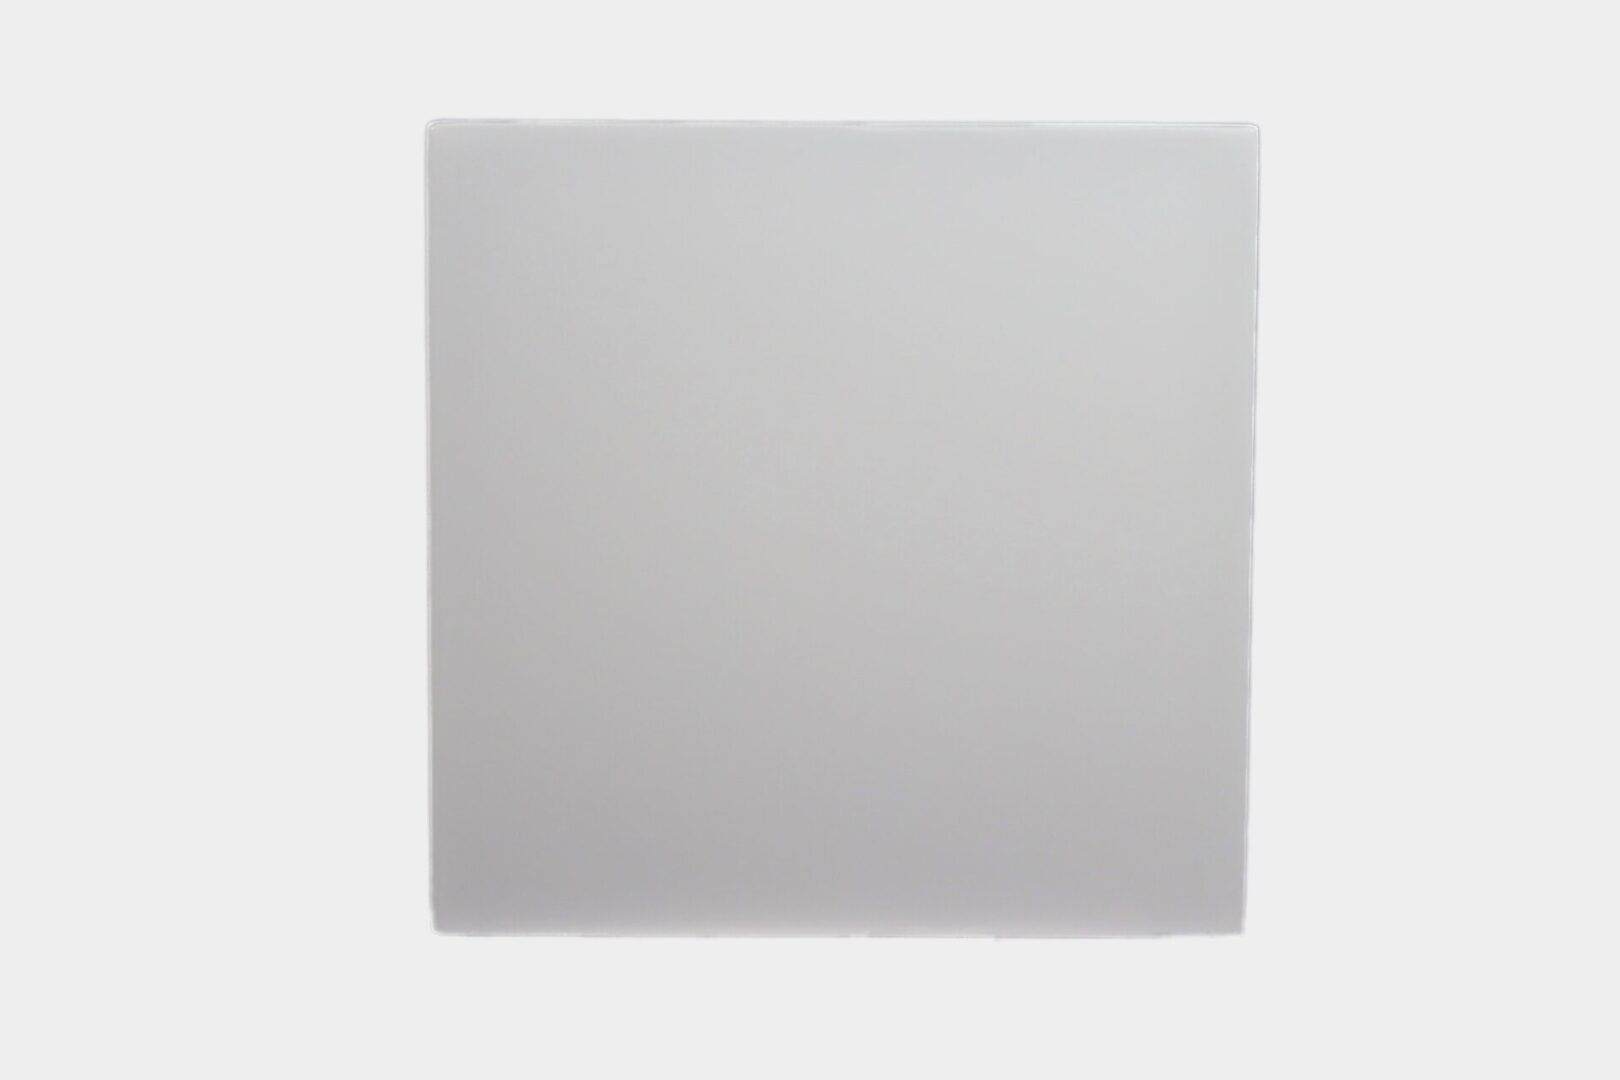 Solid White Bathroom Tile Alternative from AMI.